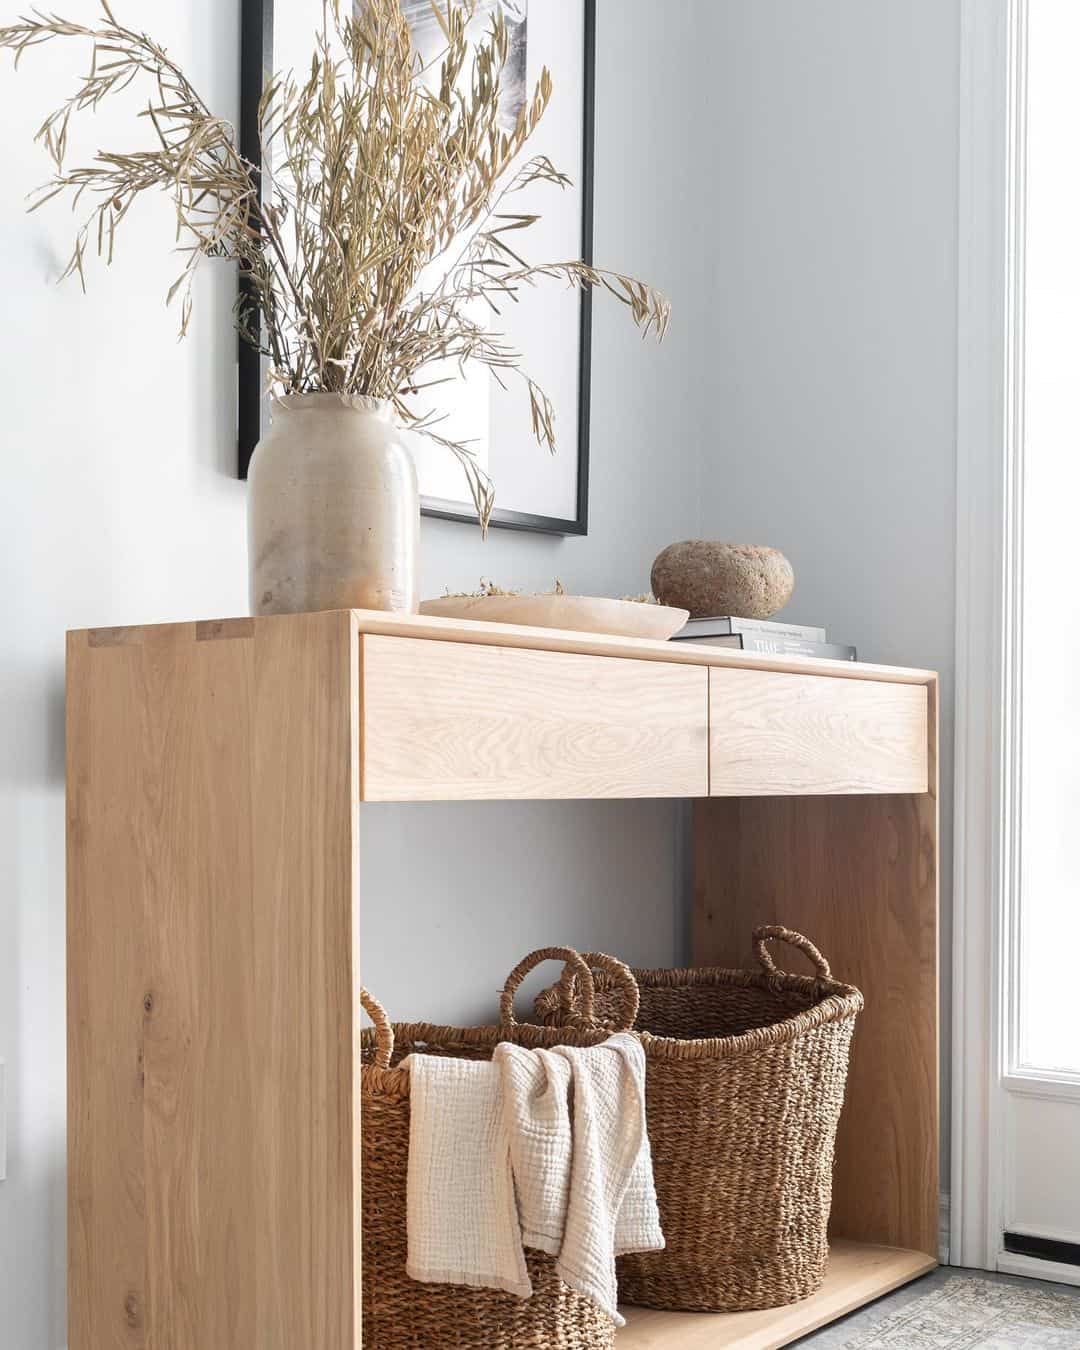 Modern Minimalism with a Wooden Console Table in the Entryway